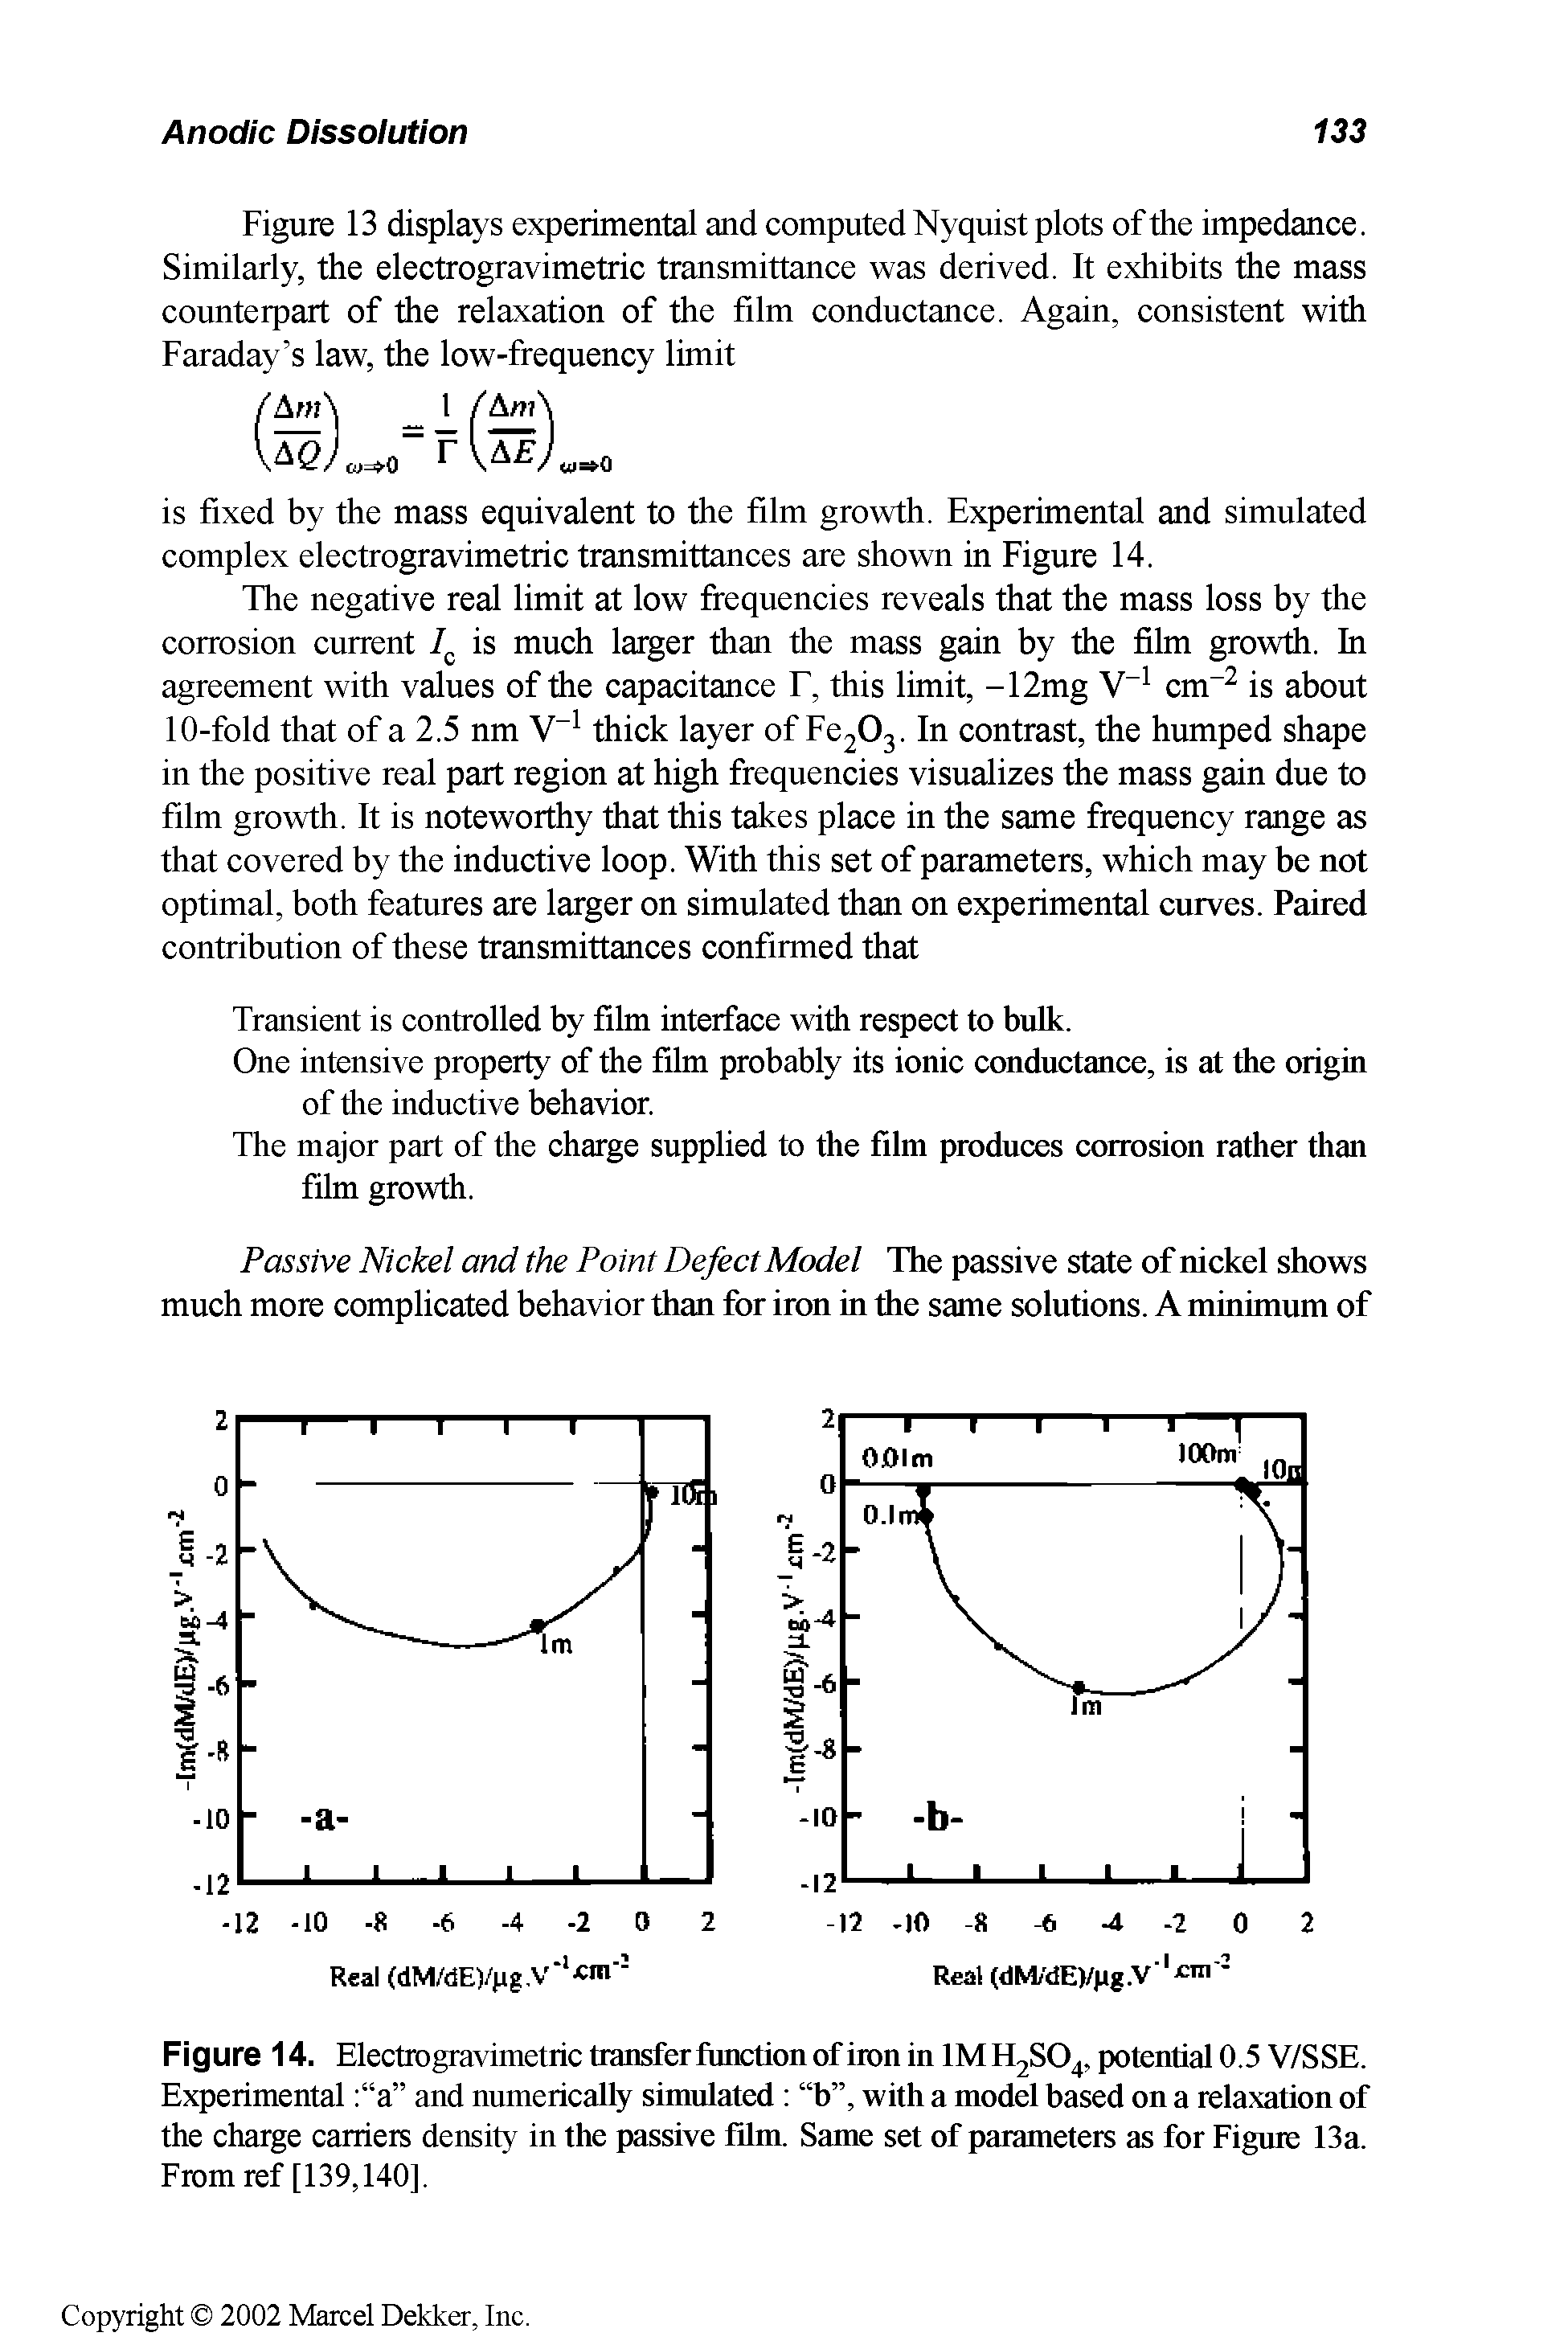 Figure 14. Electrogravimetric transfer function of iron in IMH2SO4, potential 0.5 V/SSE. Experimental a and nnmerically simulated b , with a model based on a relaxation of the charge carriers density in the passive film. Same set of parameters as for Figure 13a. From ref [139,140].